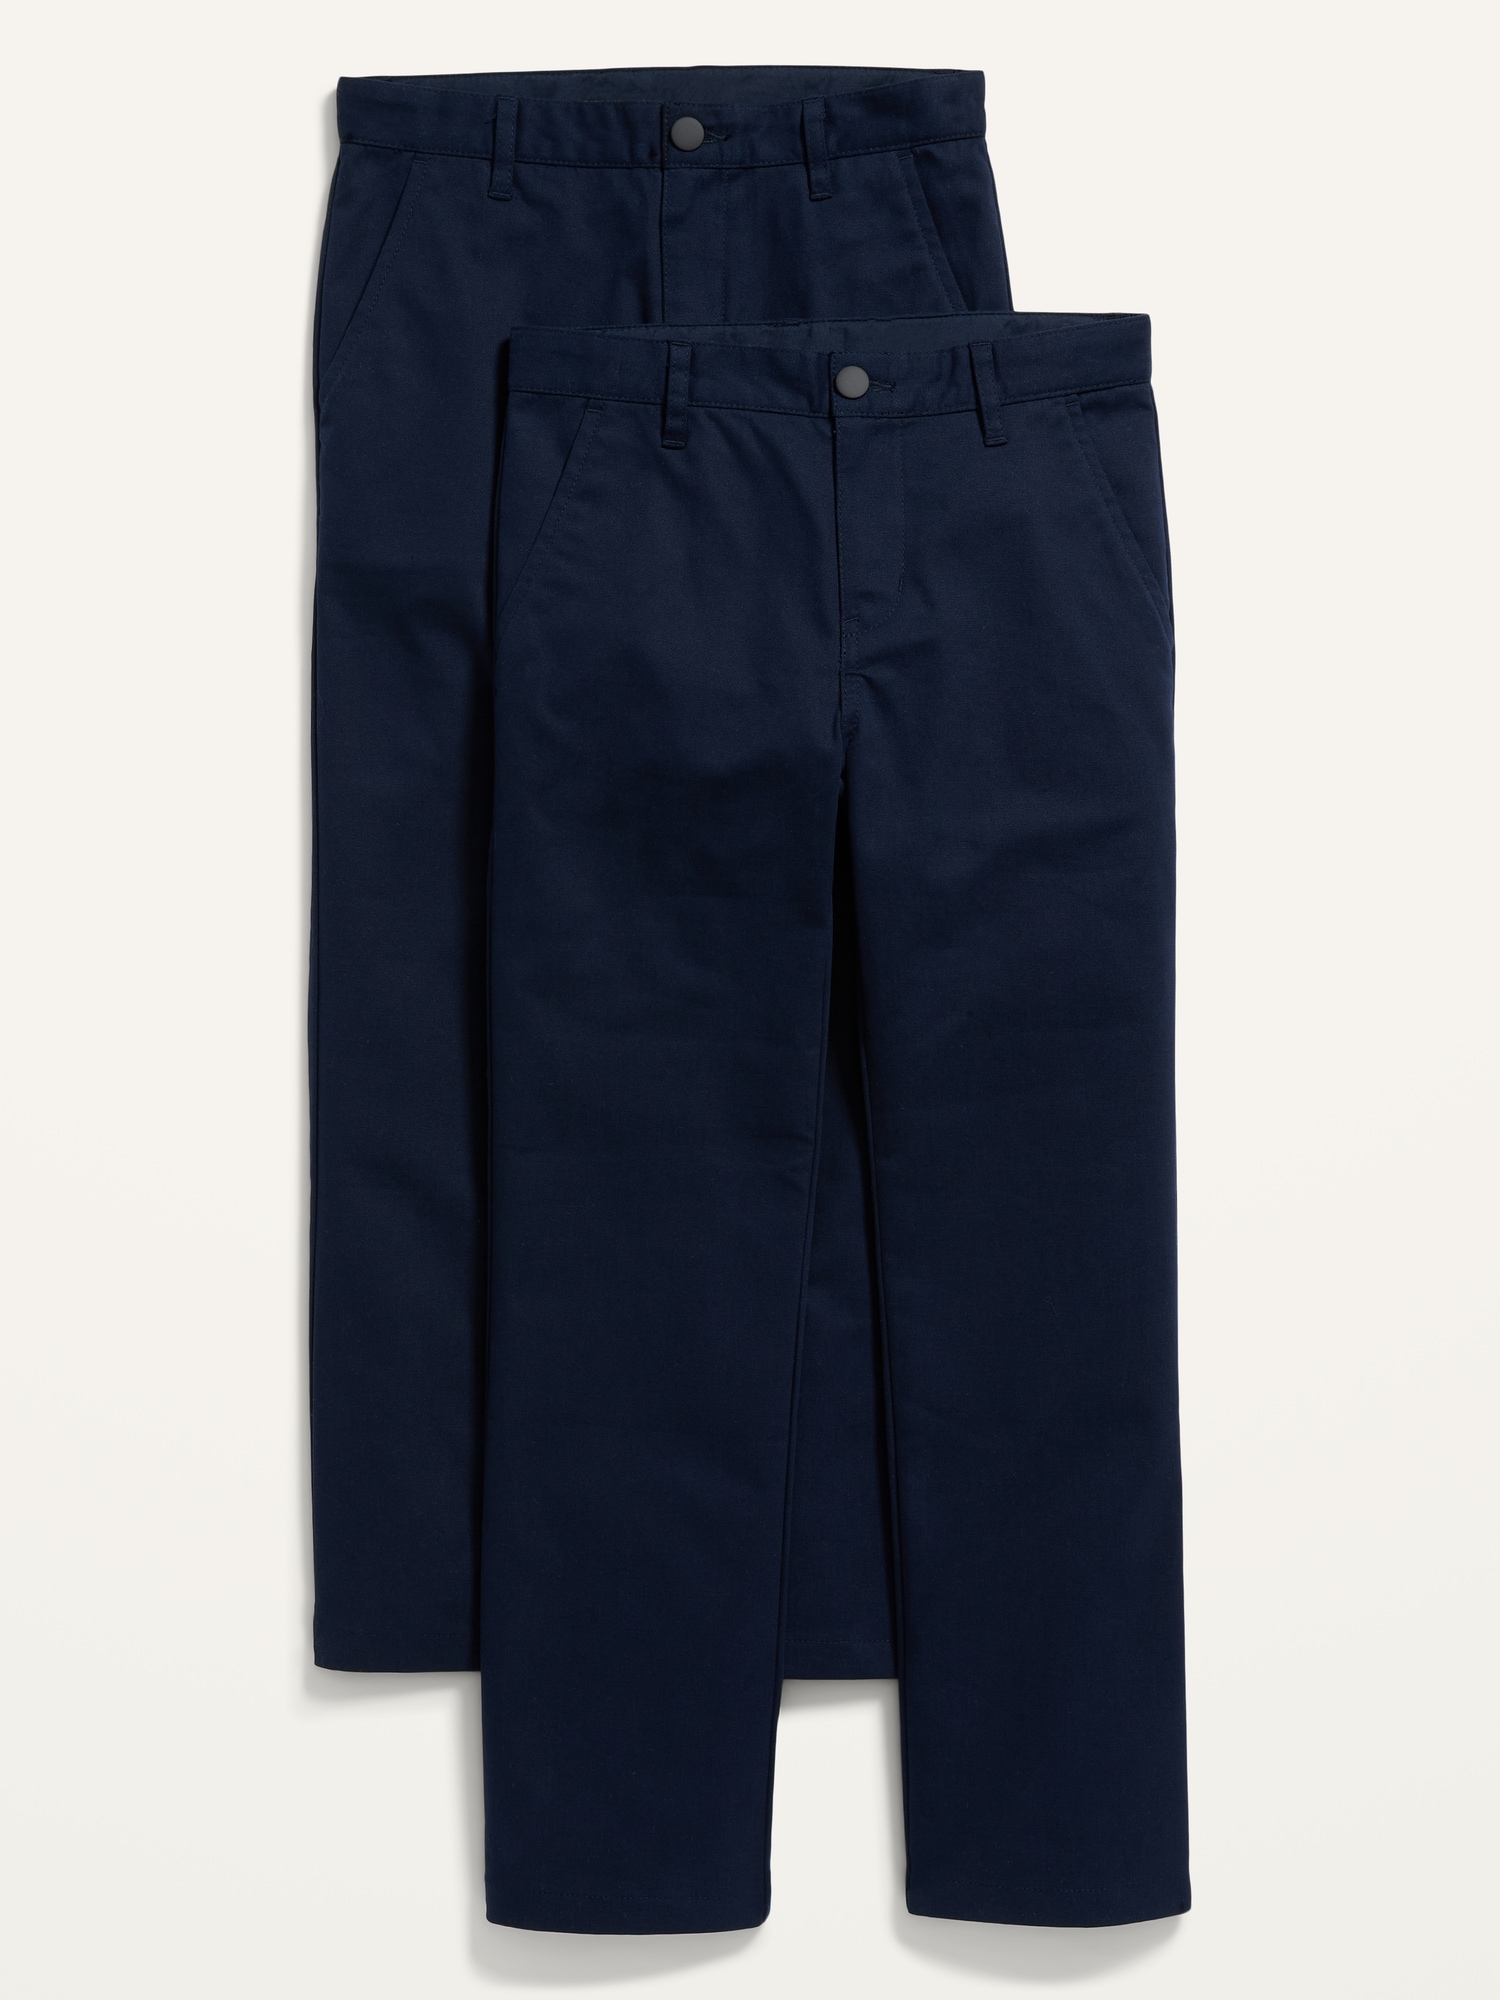 Mens Corporate Uniform Pants in Navy by CYC Corporate Label –  CYCCorporateLabel